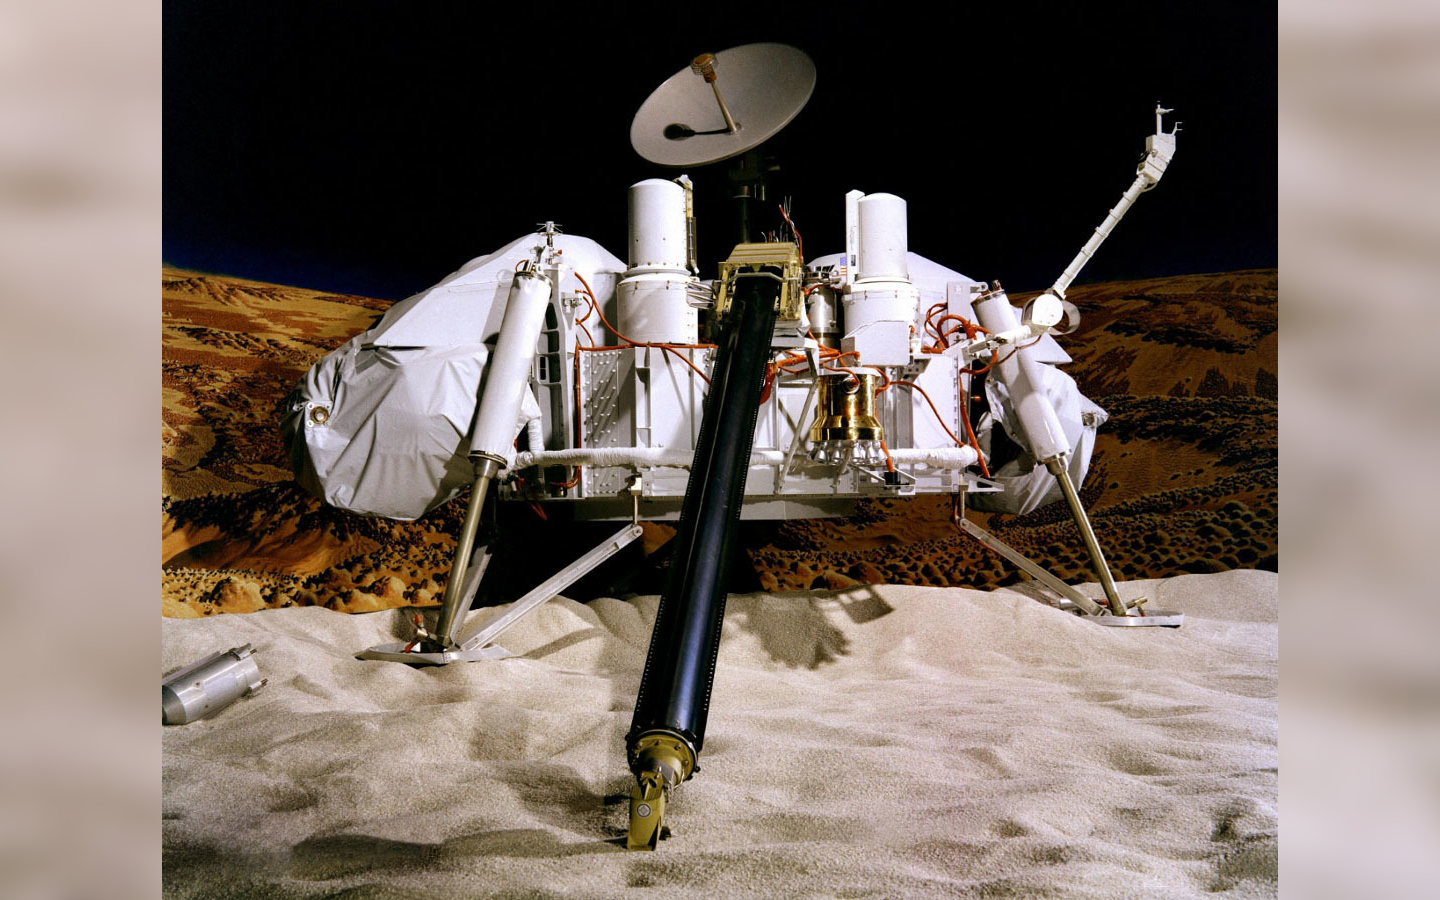 A viking lander photographed against a background showing the surface of Mars.